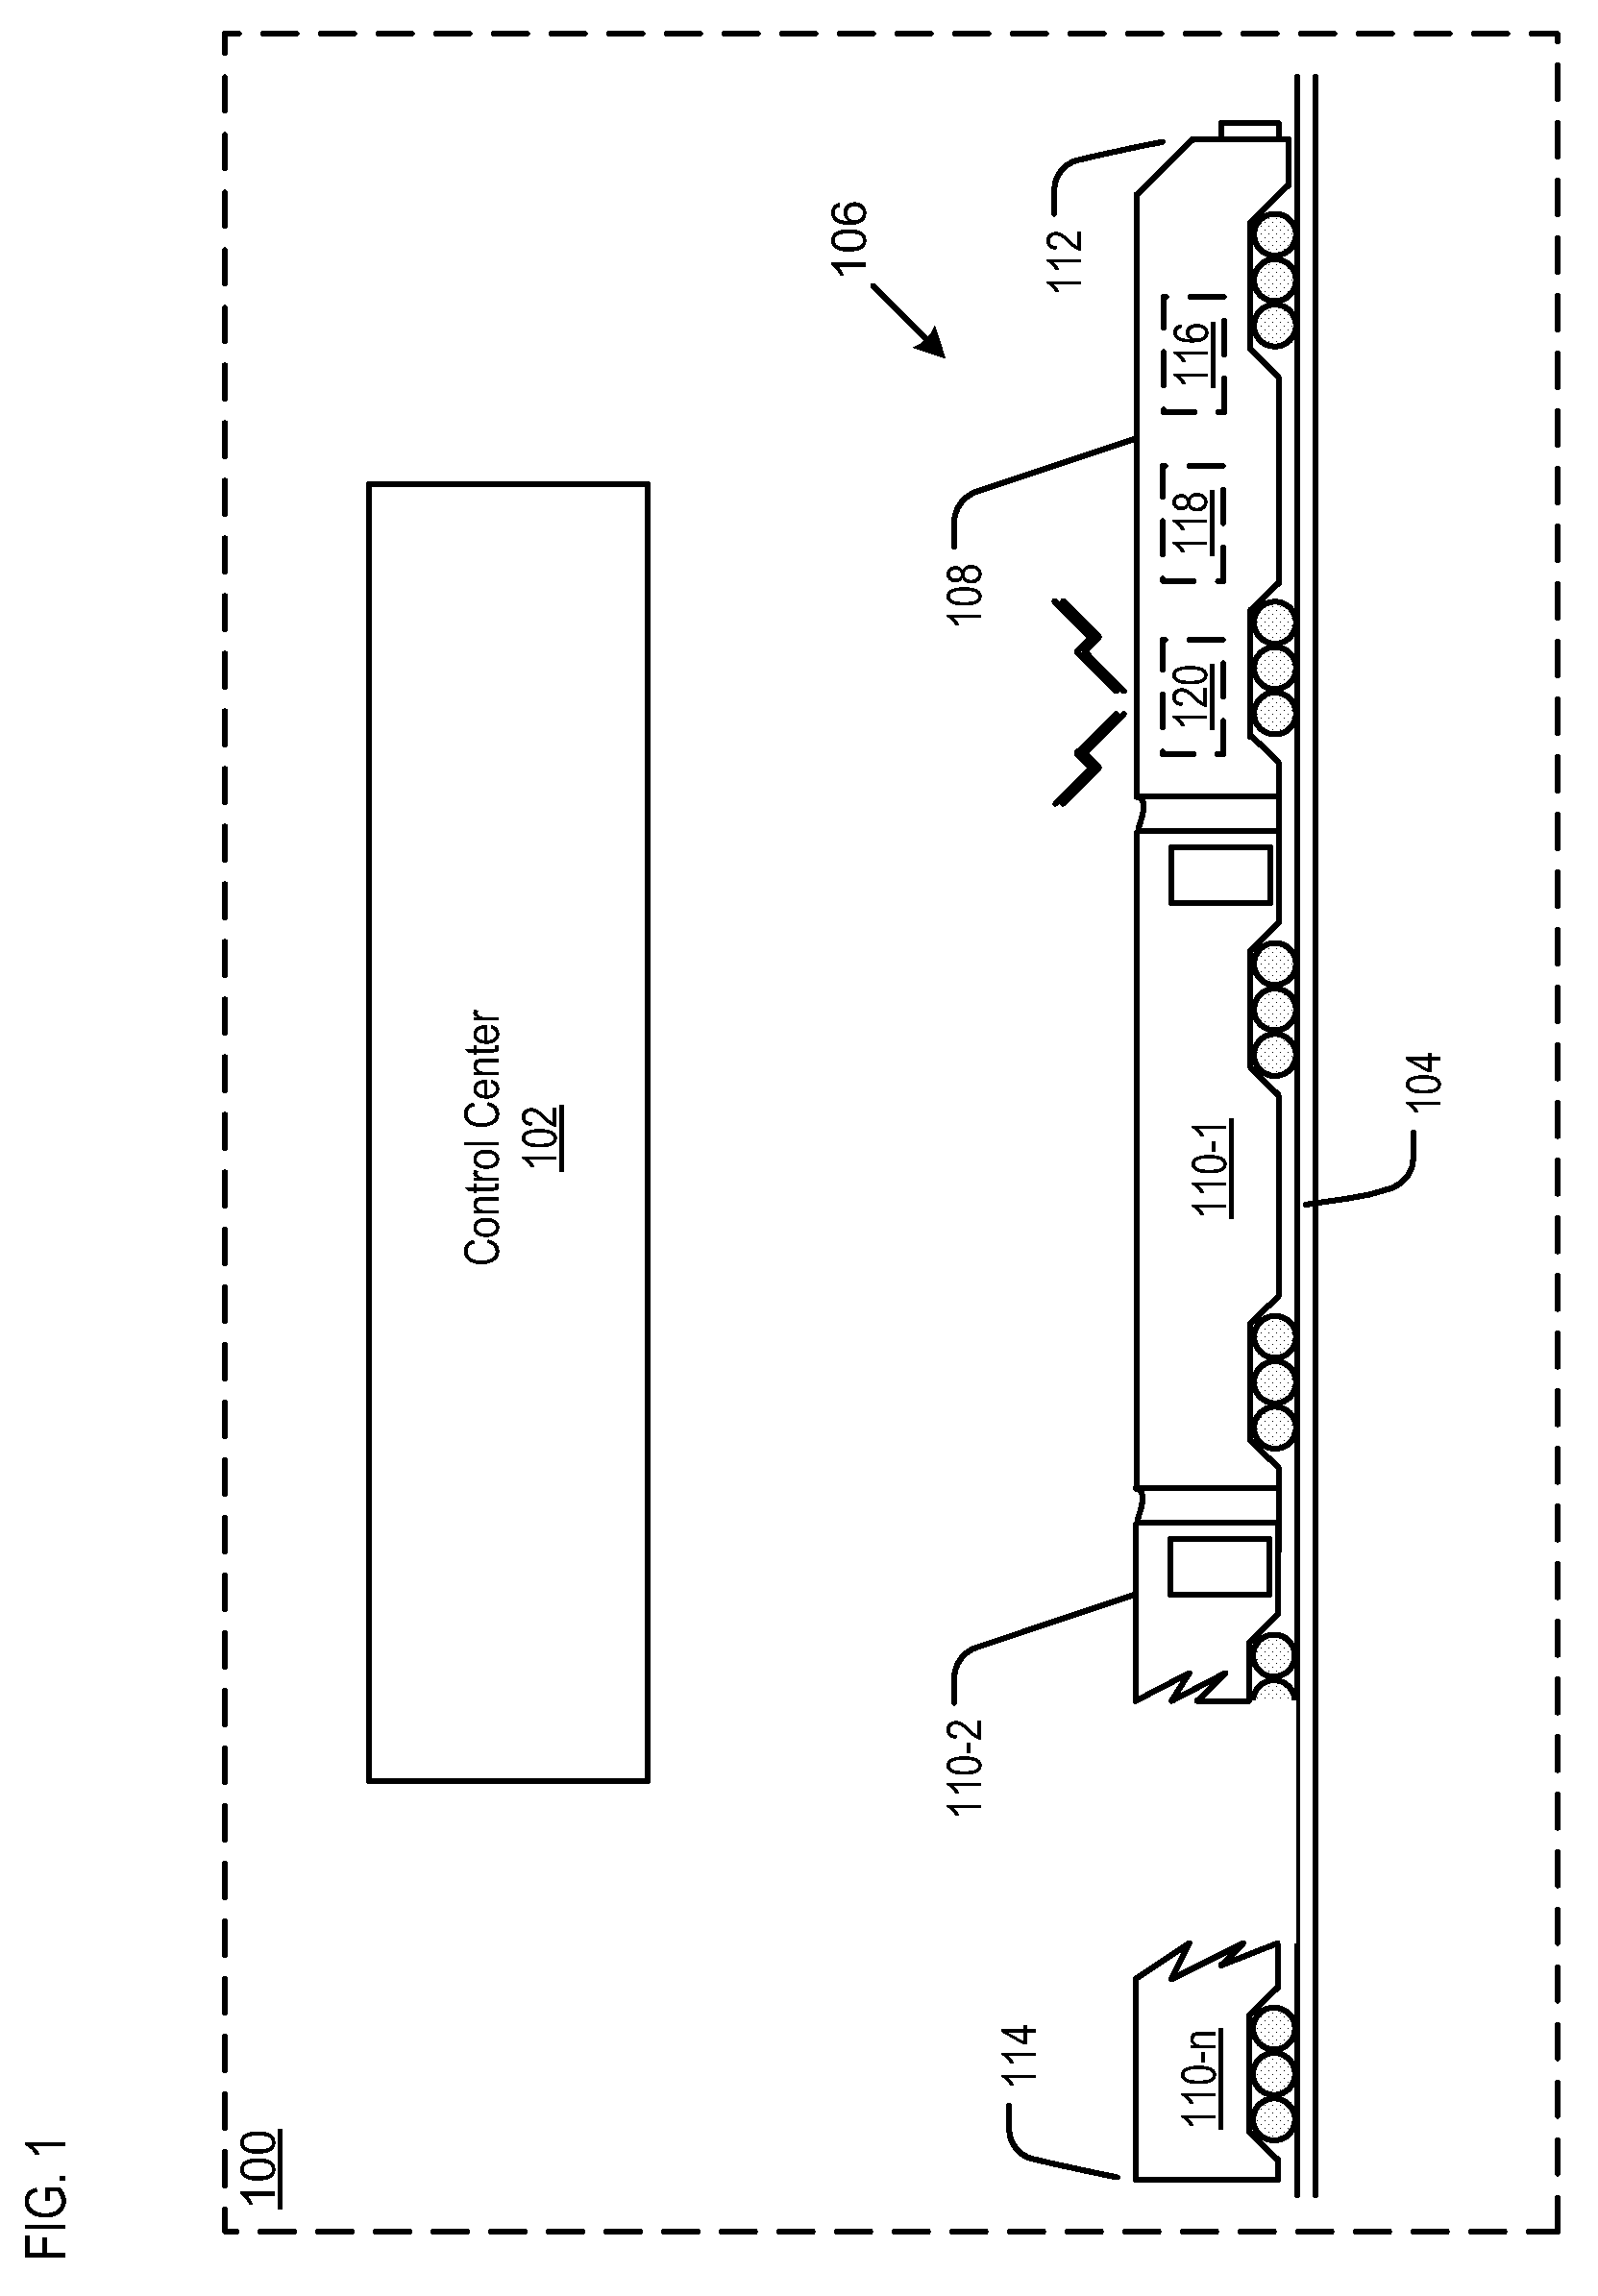 Method for the Onboard Determination of Train Detection, Train Integrity and Positive Train Separation